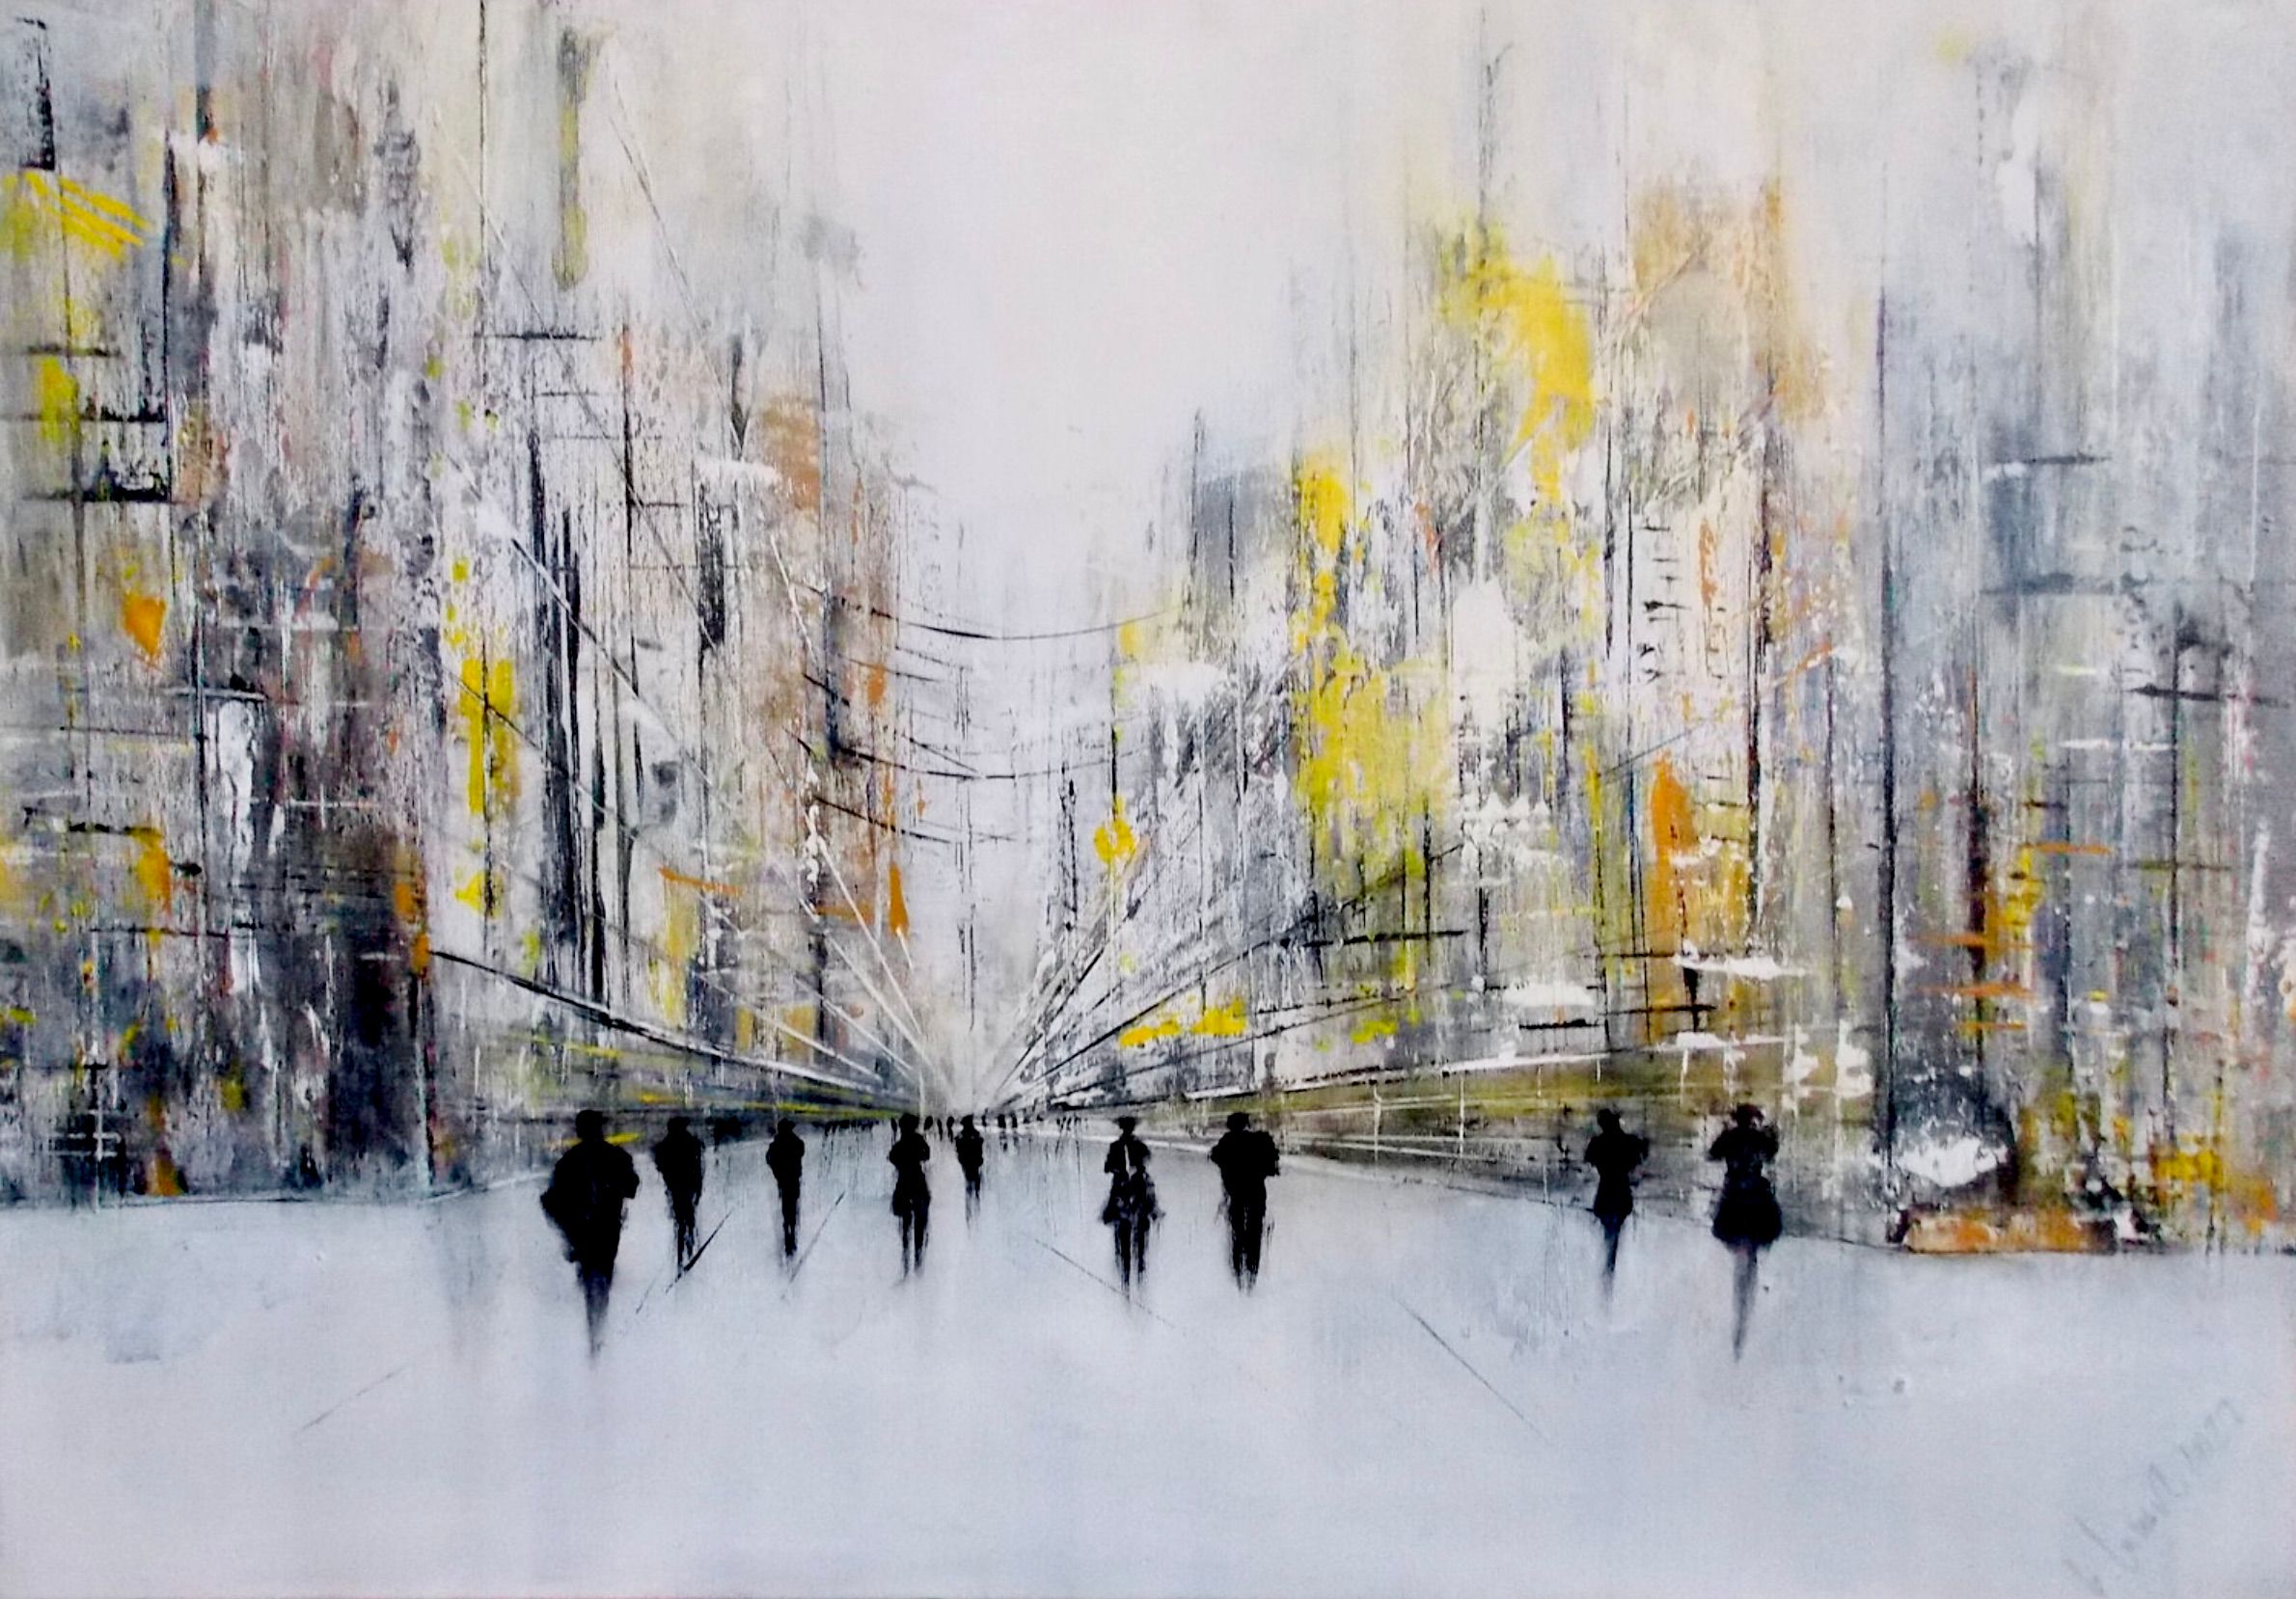 Christa Haack's "Cityscape 4" This abstract metropolitan painting shows people silhouettes in front of a city ambience. It is almost a black and white picture with the additional colours yellow and orange.